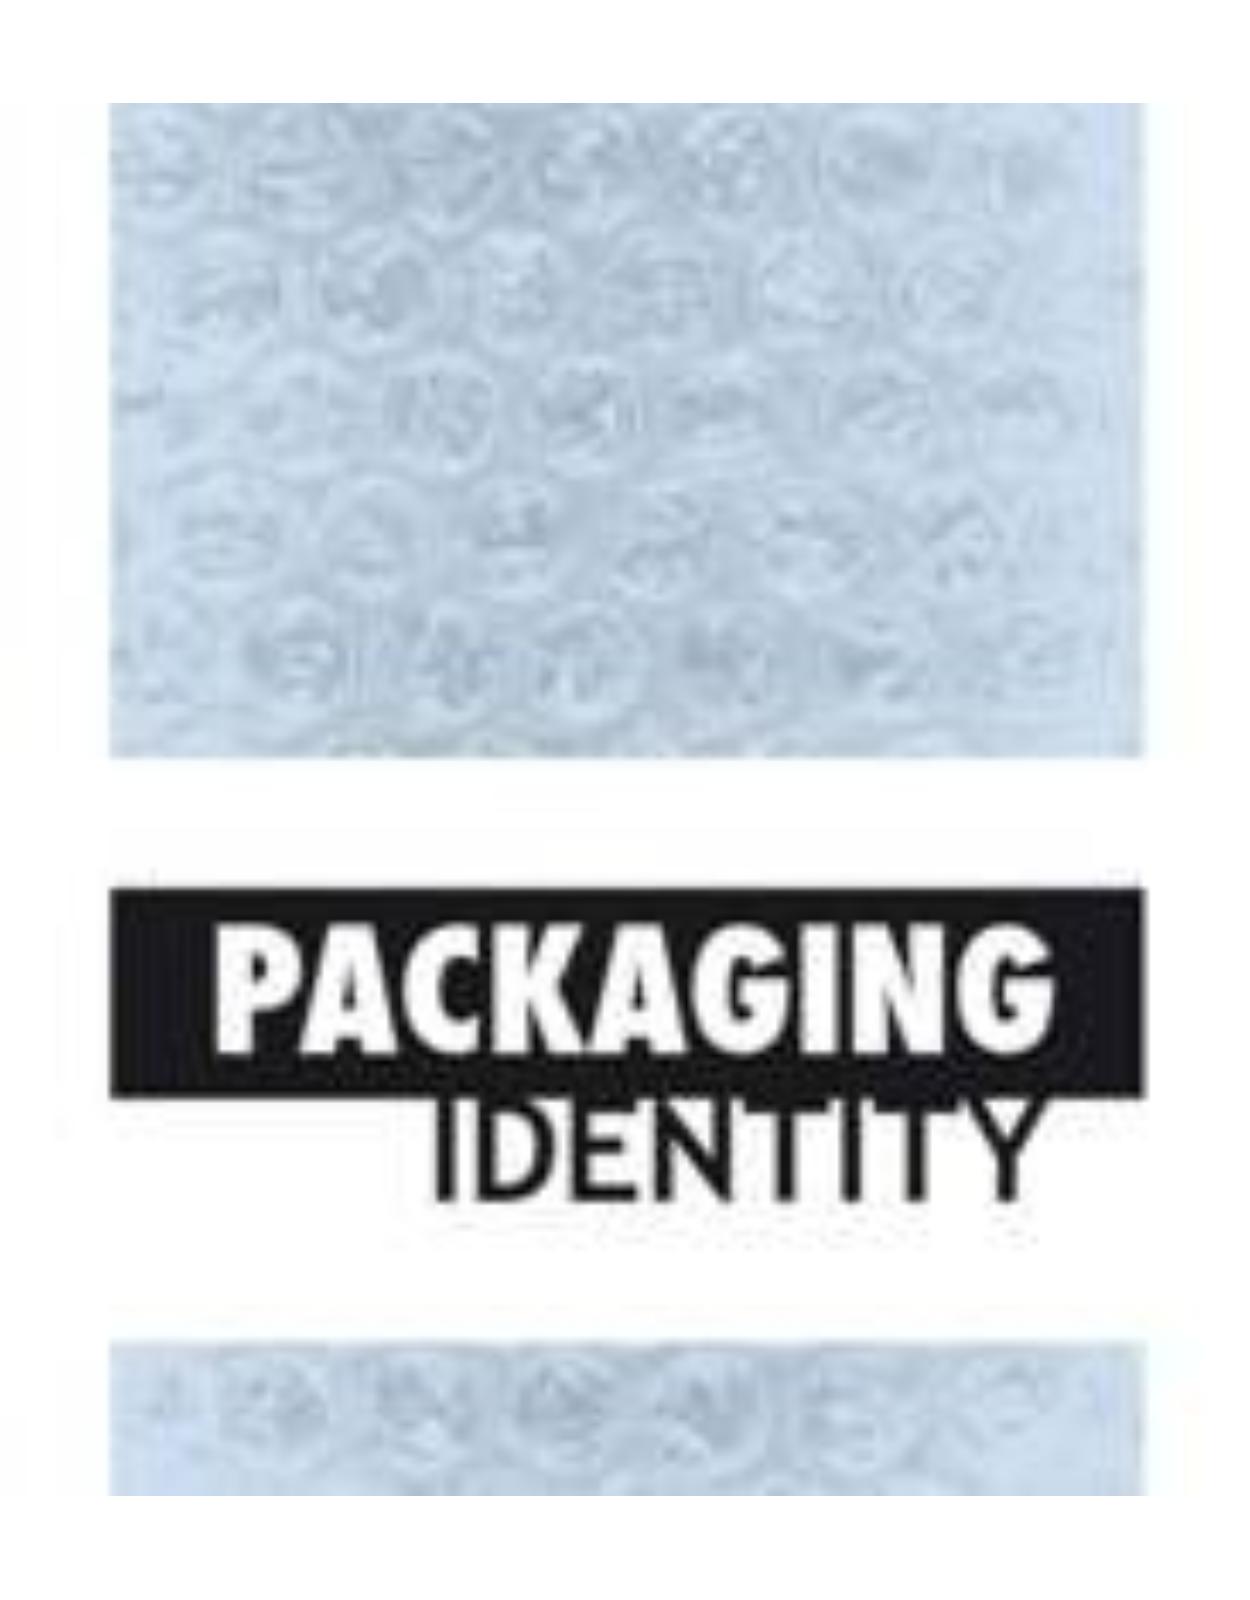 Packaging Identity